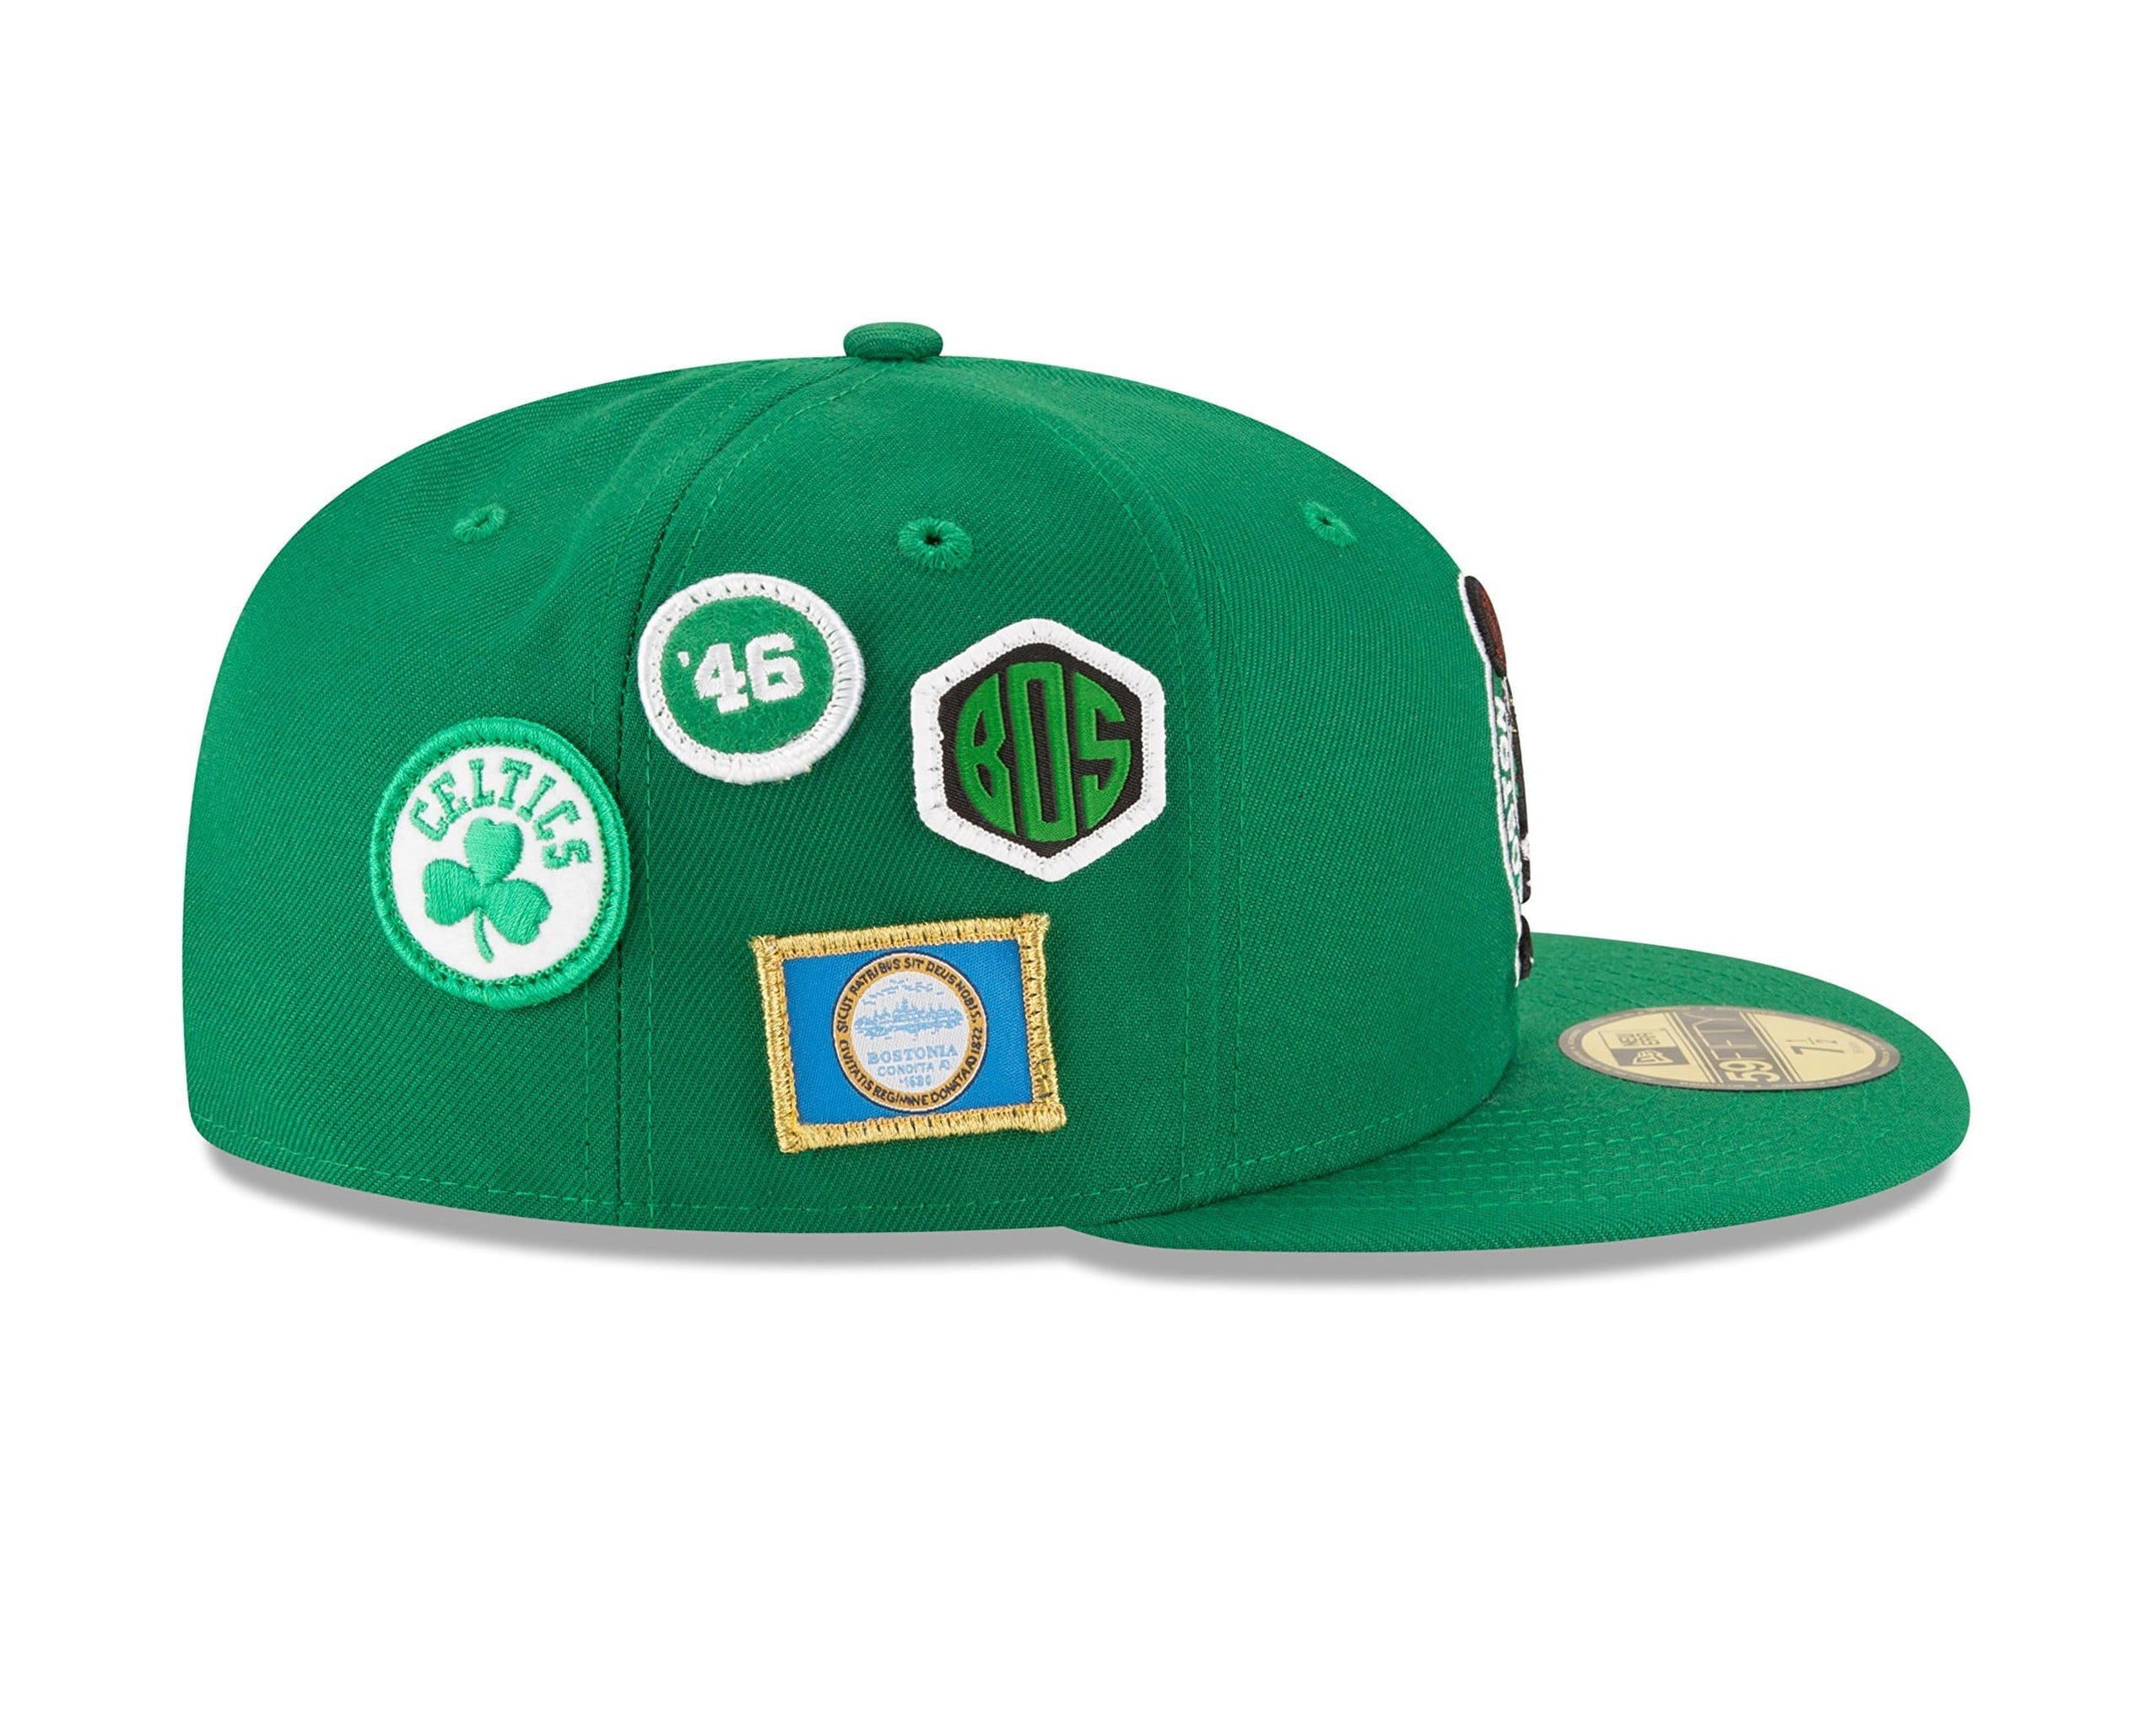 Celtics boston hat fitted era 59fifty official team color nba men hats green mens 2tone heathered tone kelly gray low